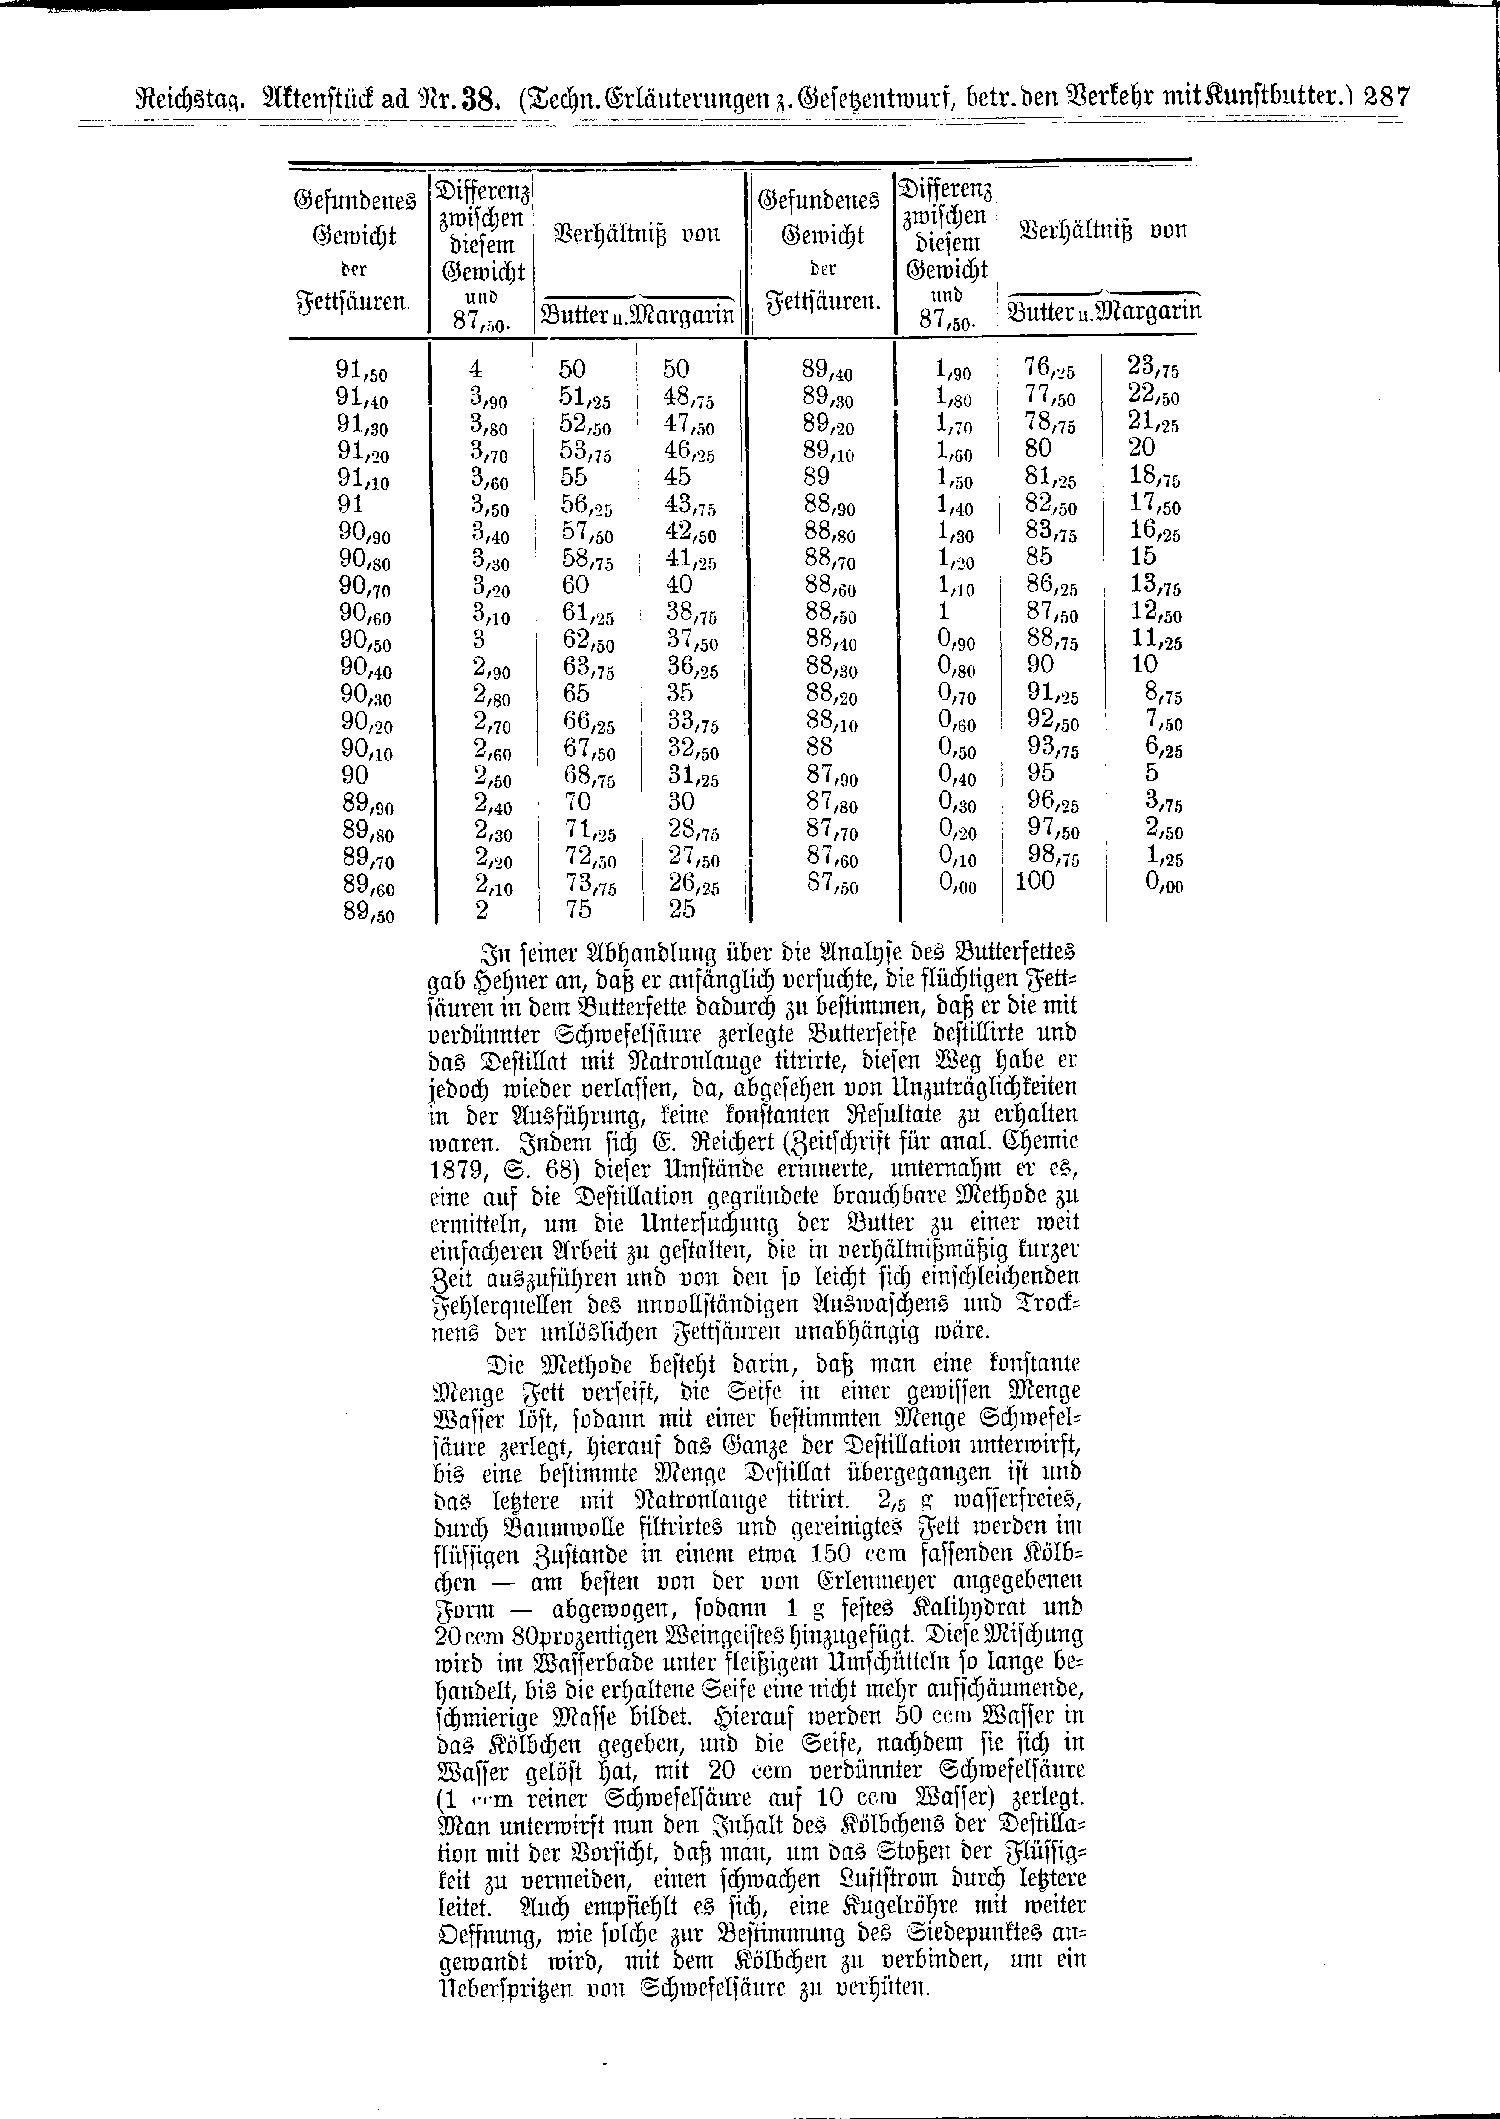 Scan of page 287